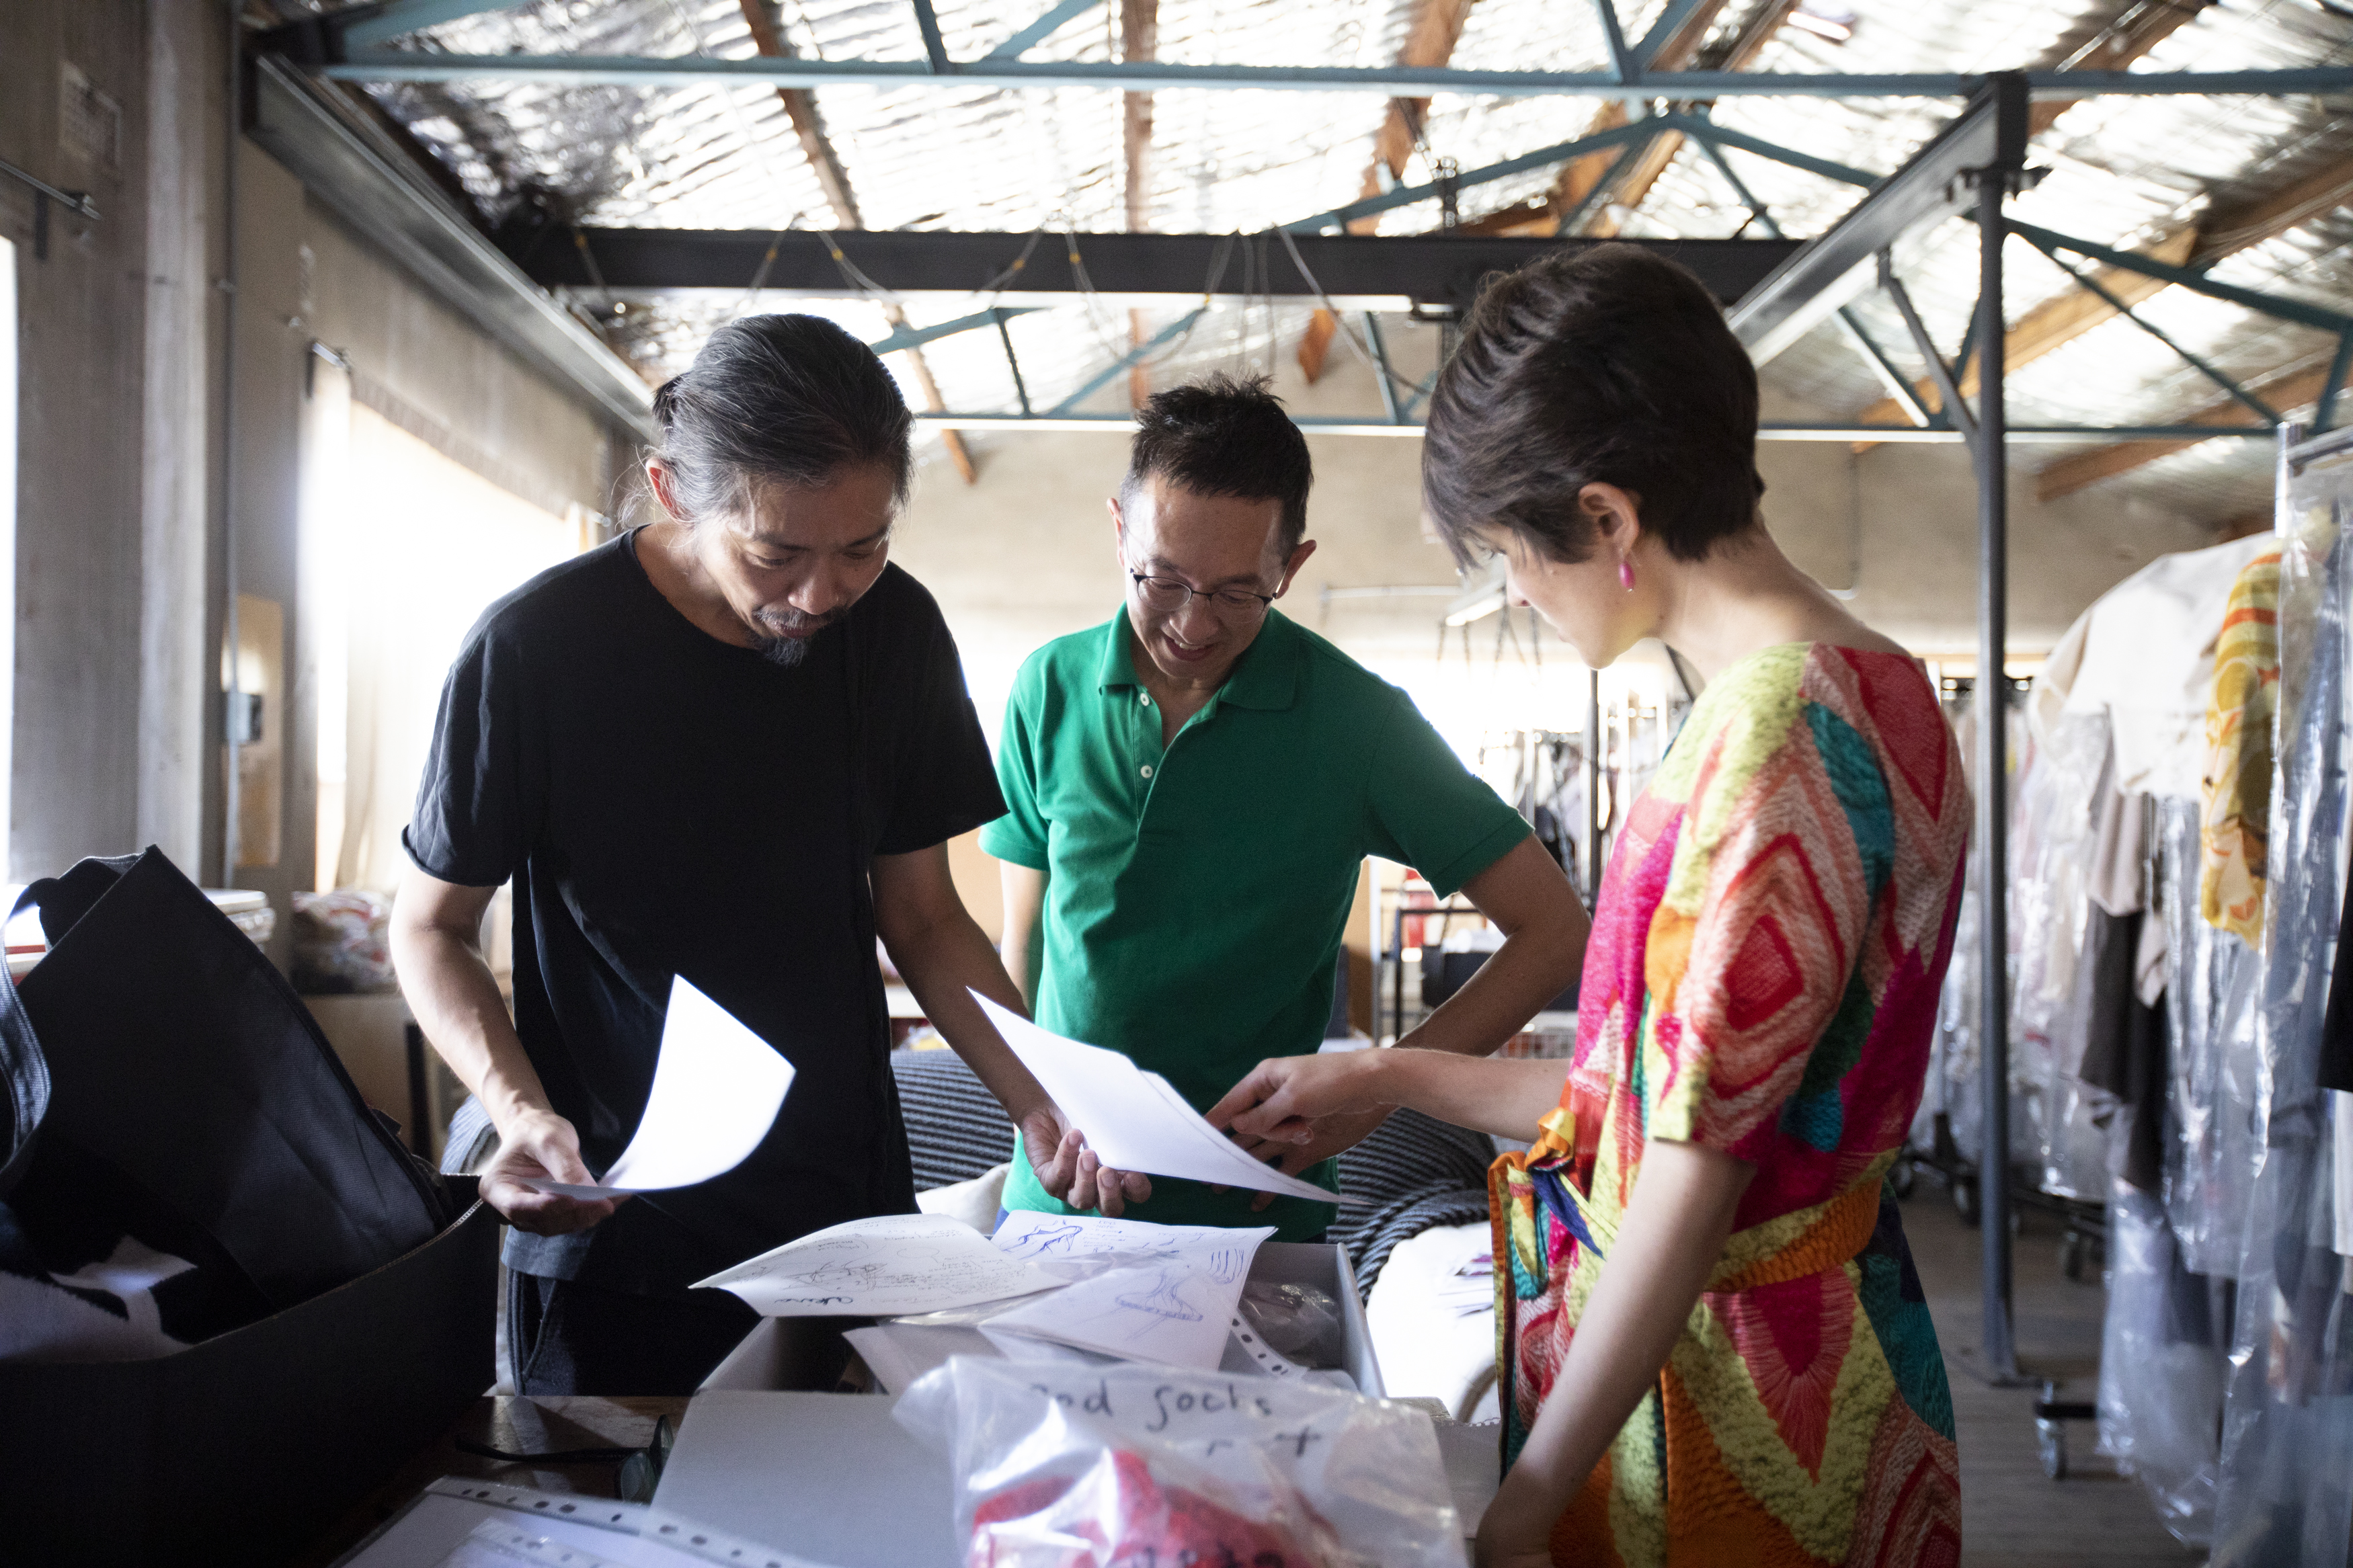 Two men and a woman stand around a table discussing fashion drawings and fabric samples. They are in the designer’s studio with garments hanging on racks in the background.